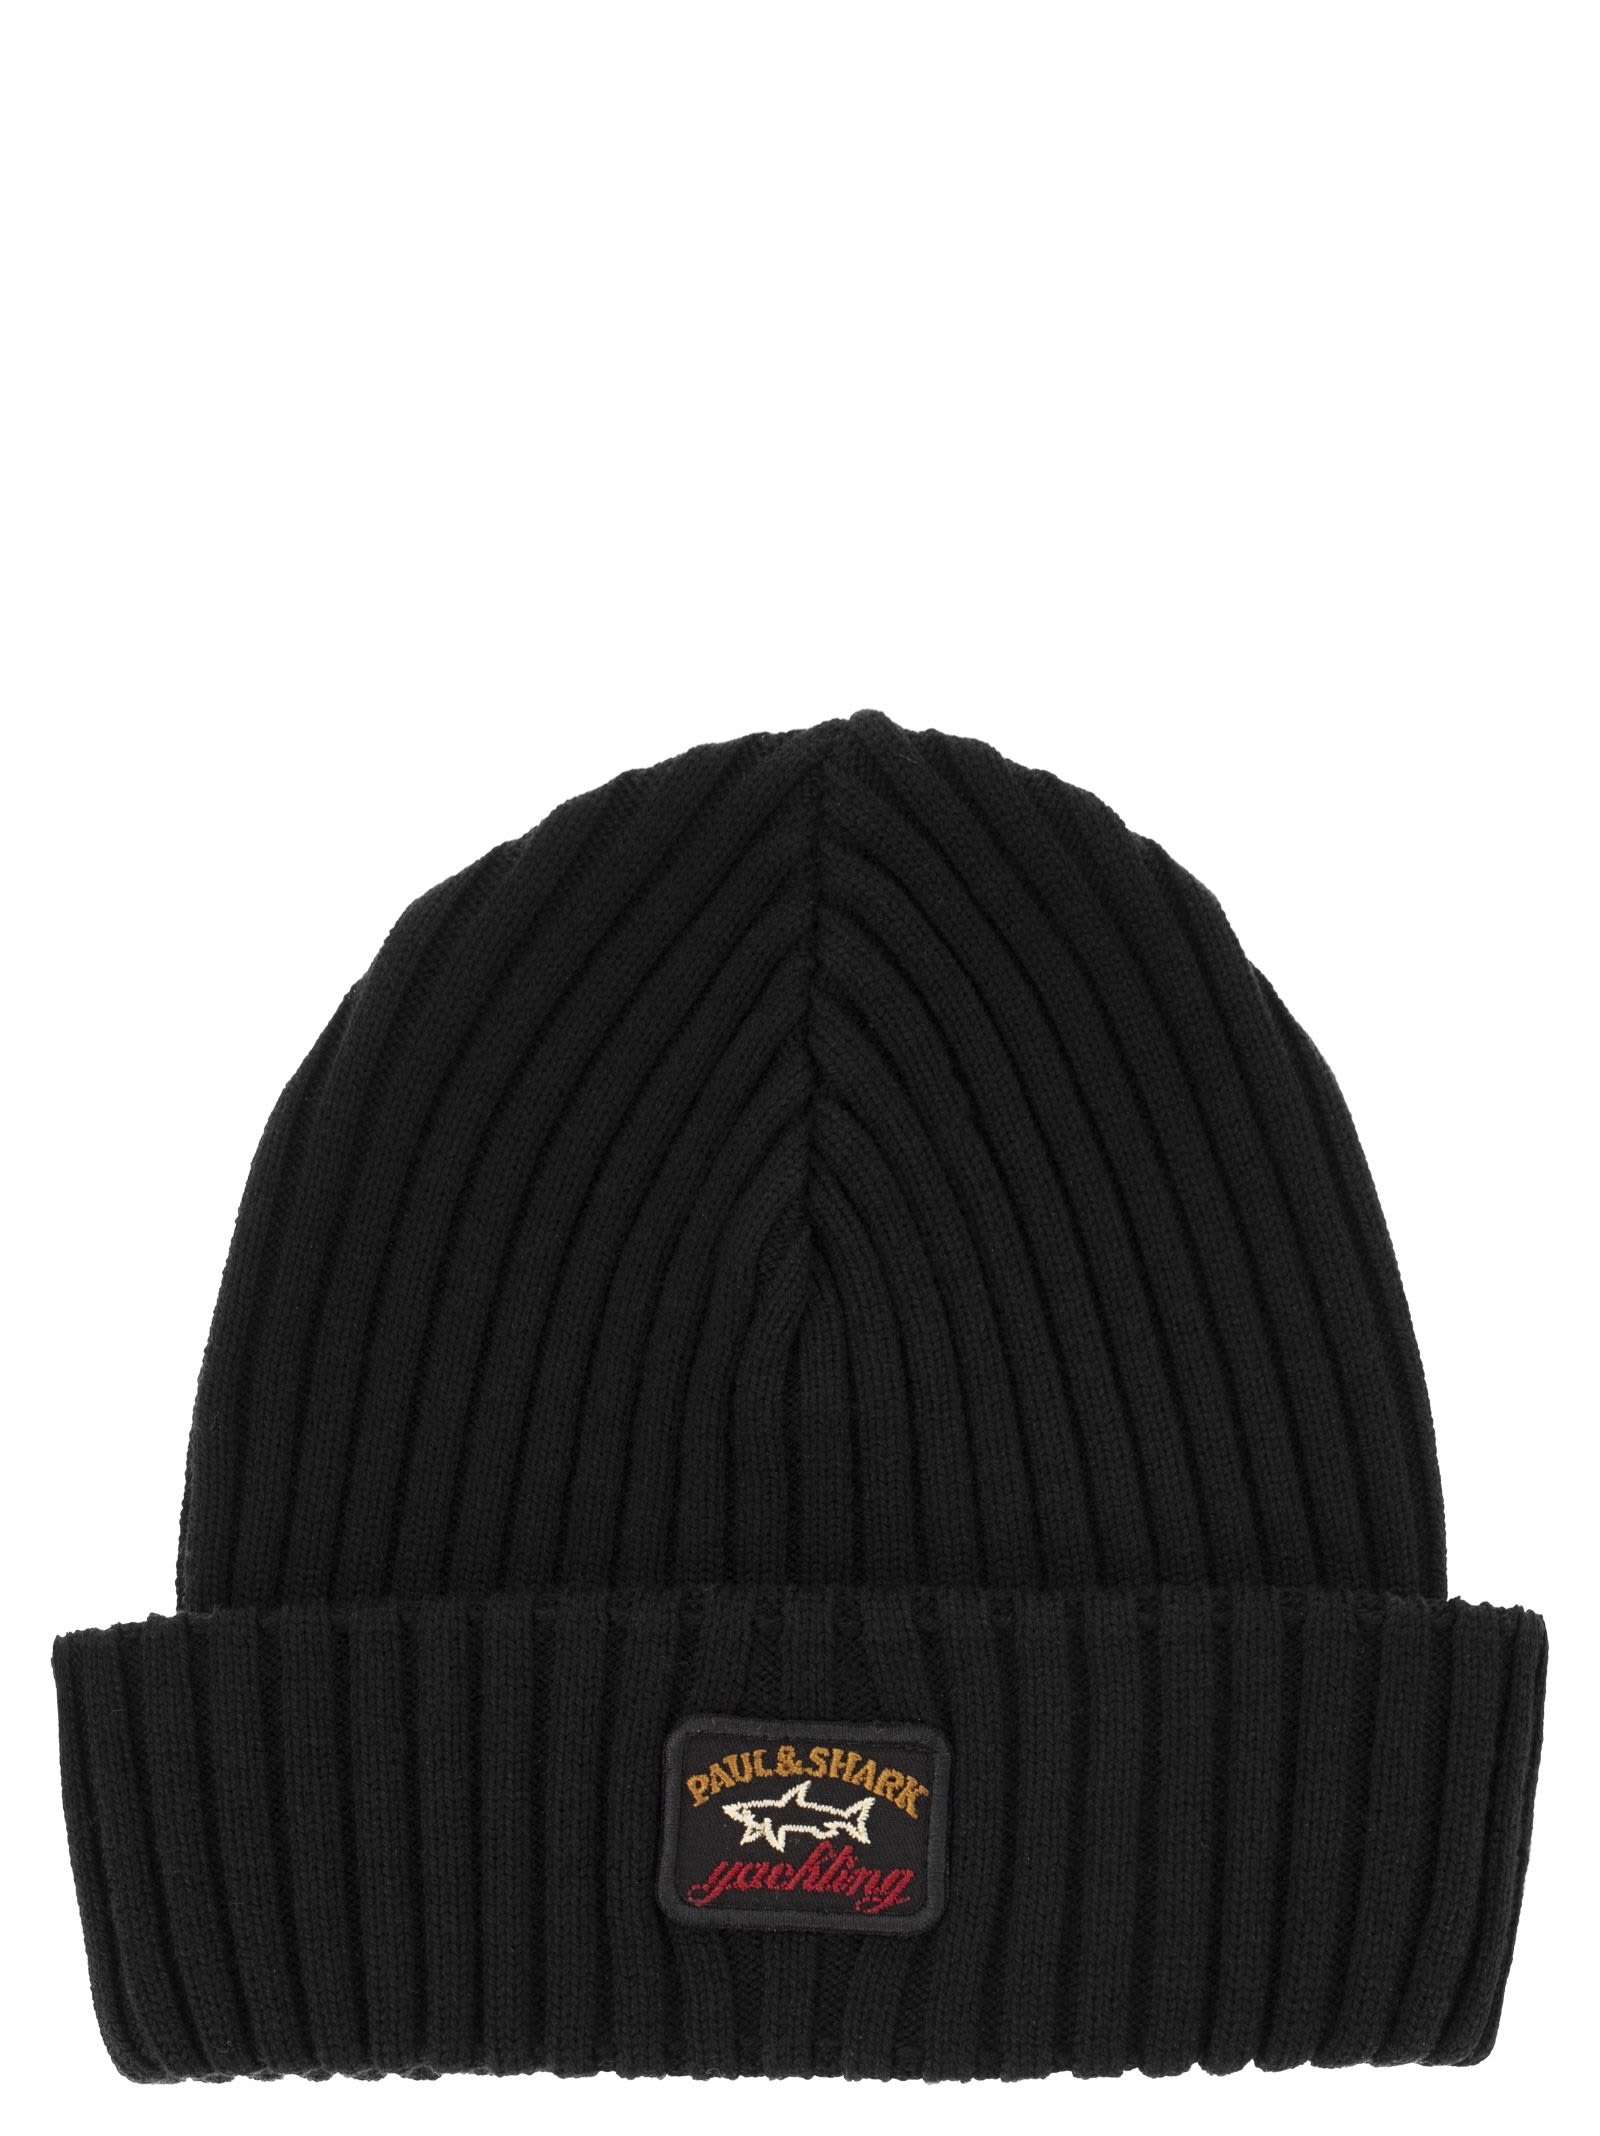 Iconic Coin Badge Ribbed Wool Hat Paul & shark